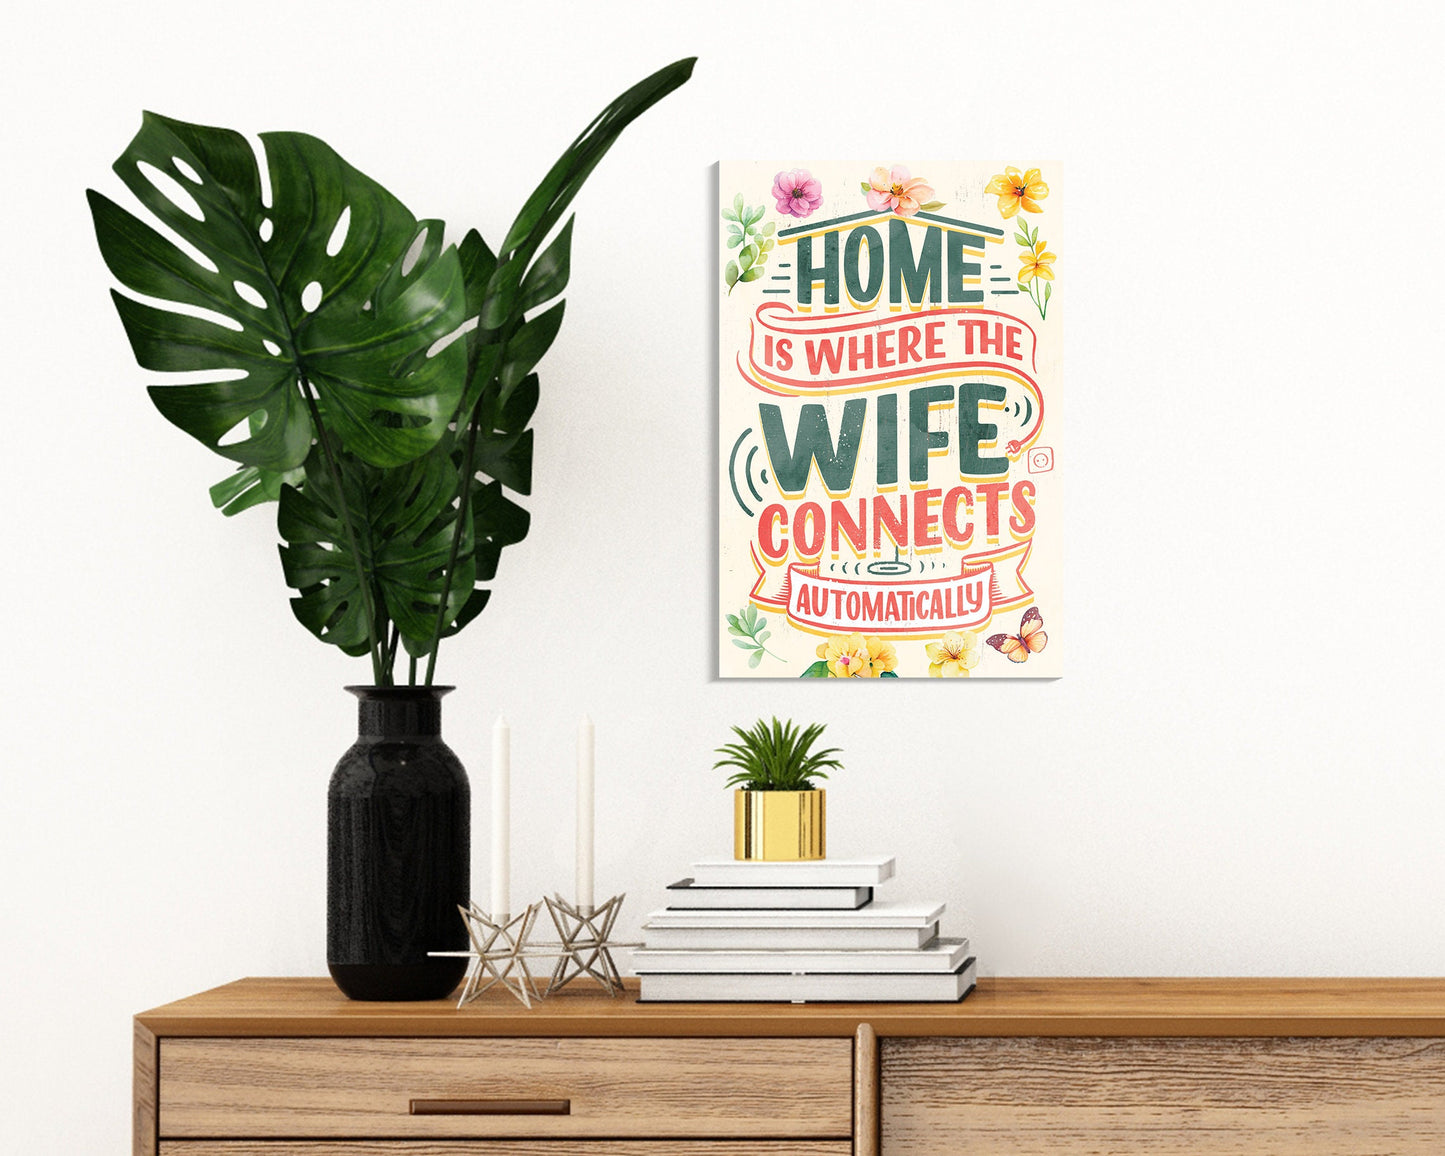 Home is Where the Wife Connects Automatically - 7.5in x 5in Humor Wooden Wall Decor Sign - Perfect for Home & Office, Great Gift for Couples